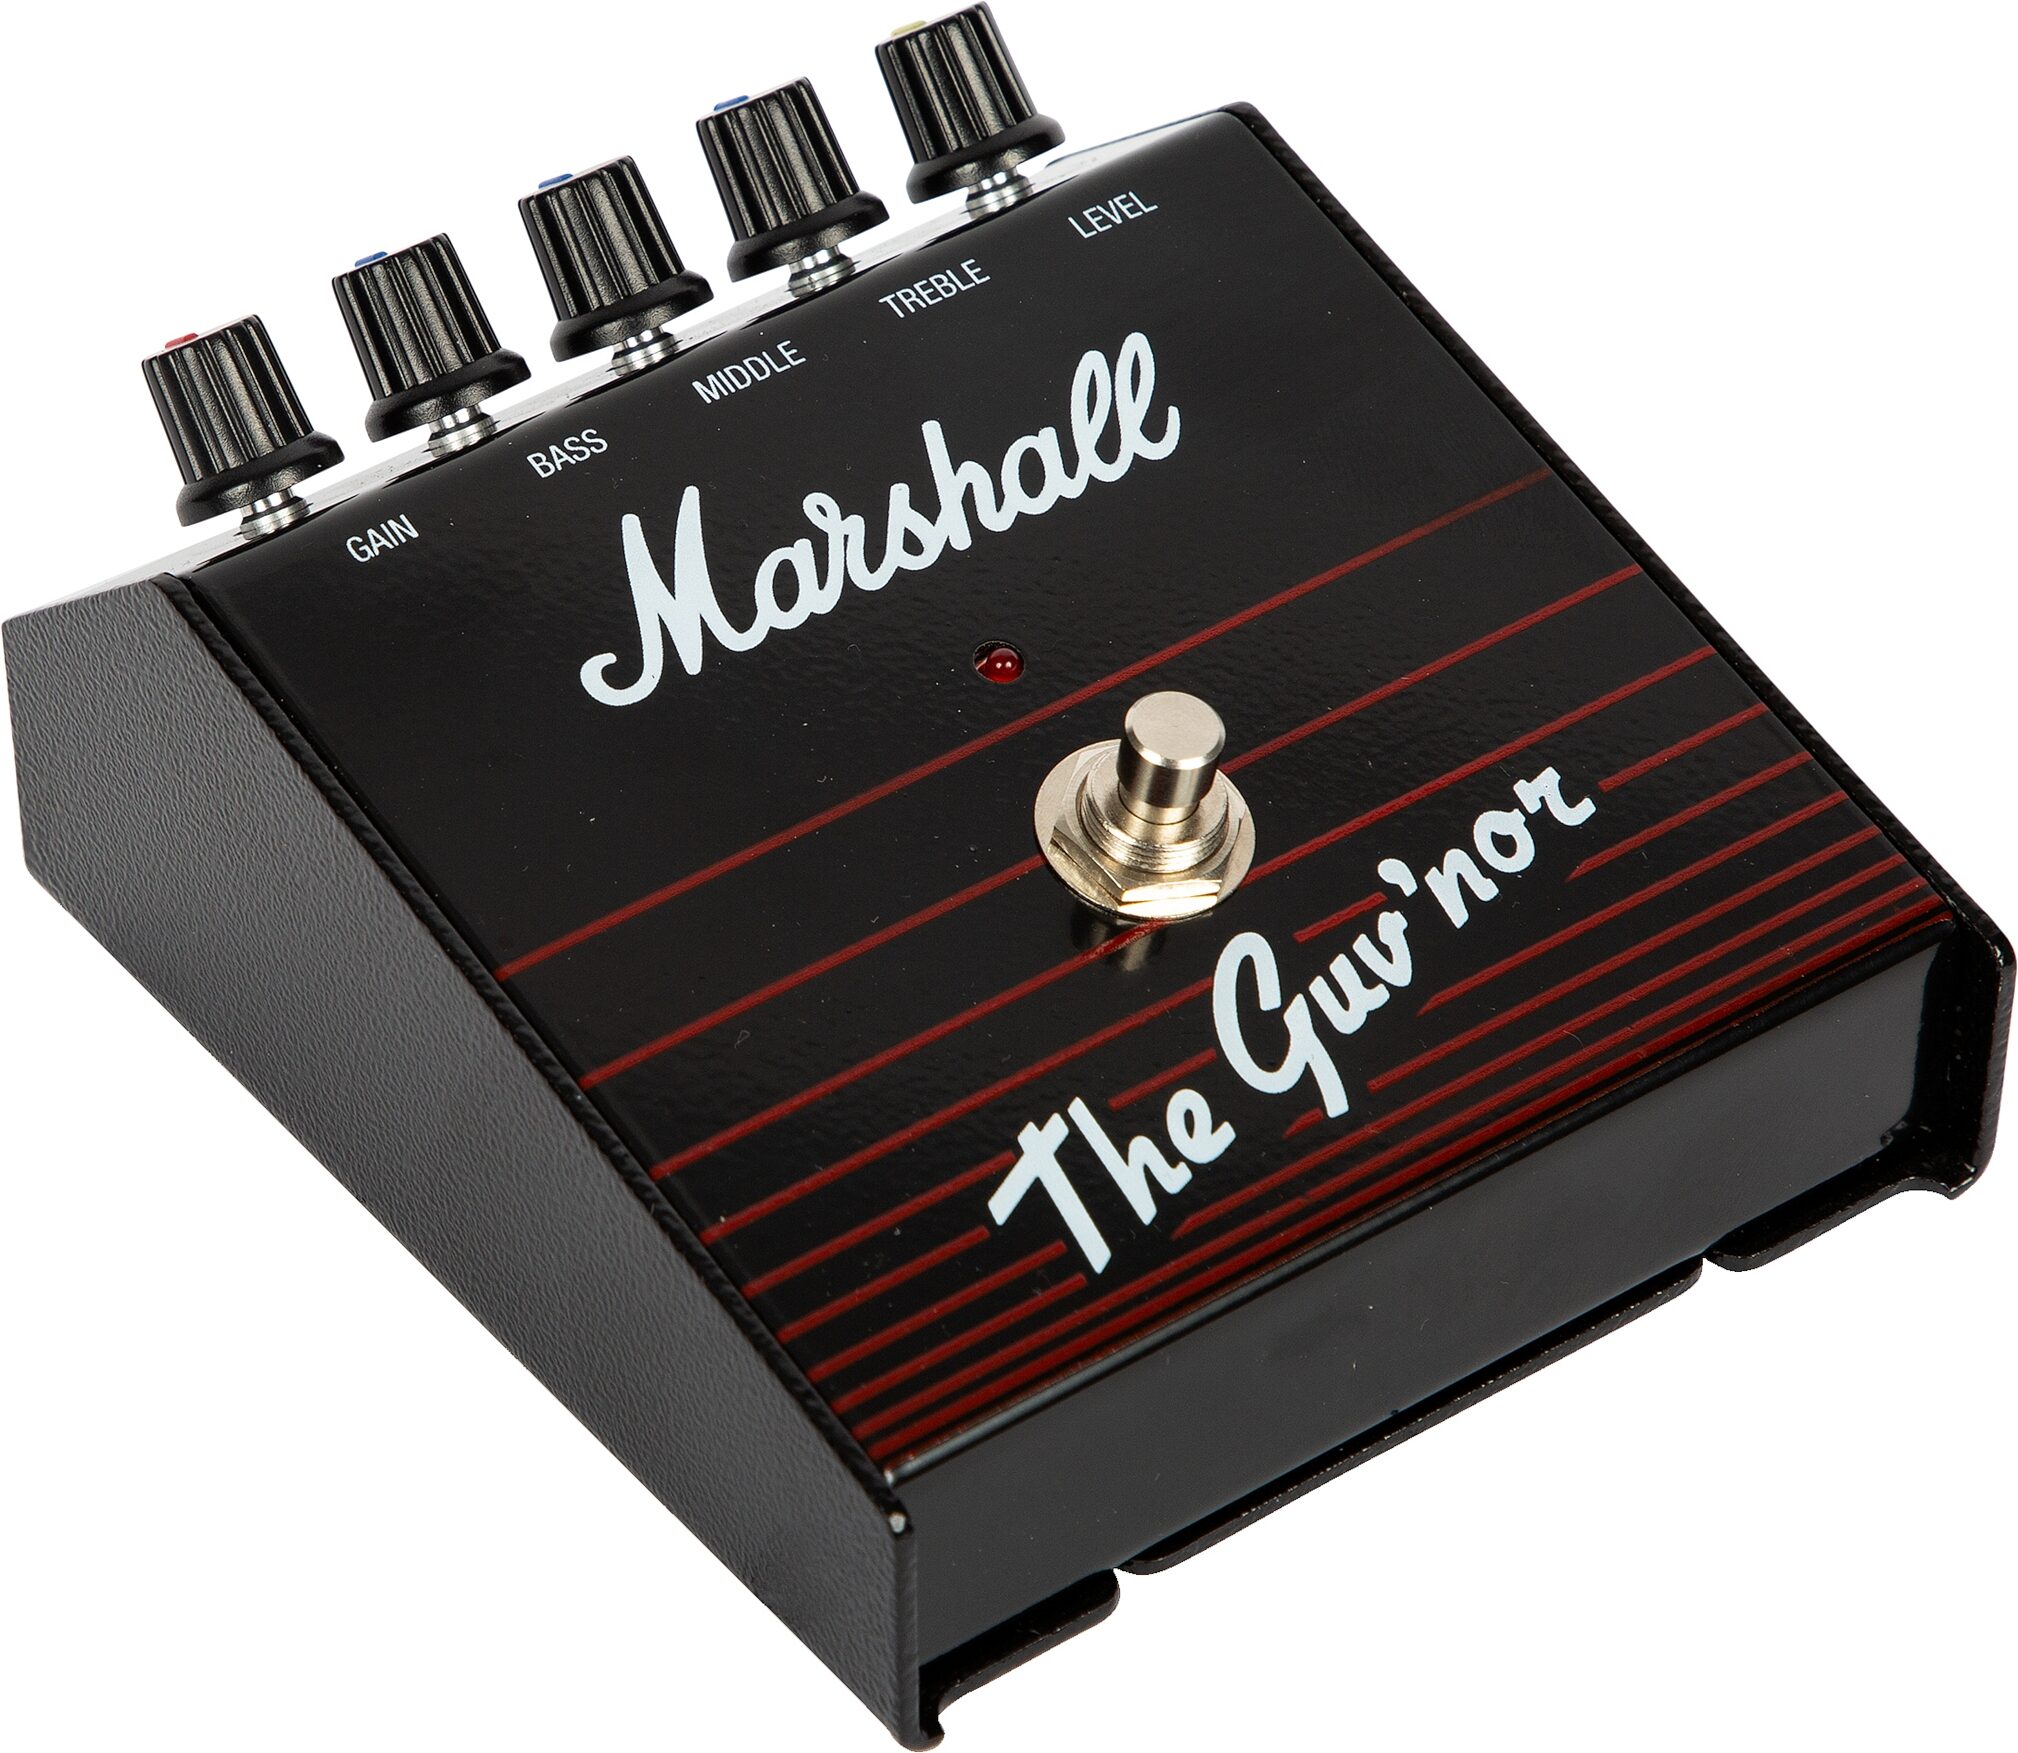 Marshall The Guv'nor Reissue Overdrive/Distortion Pedal